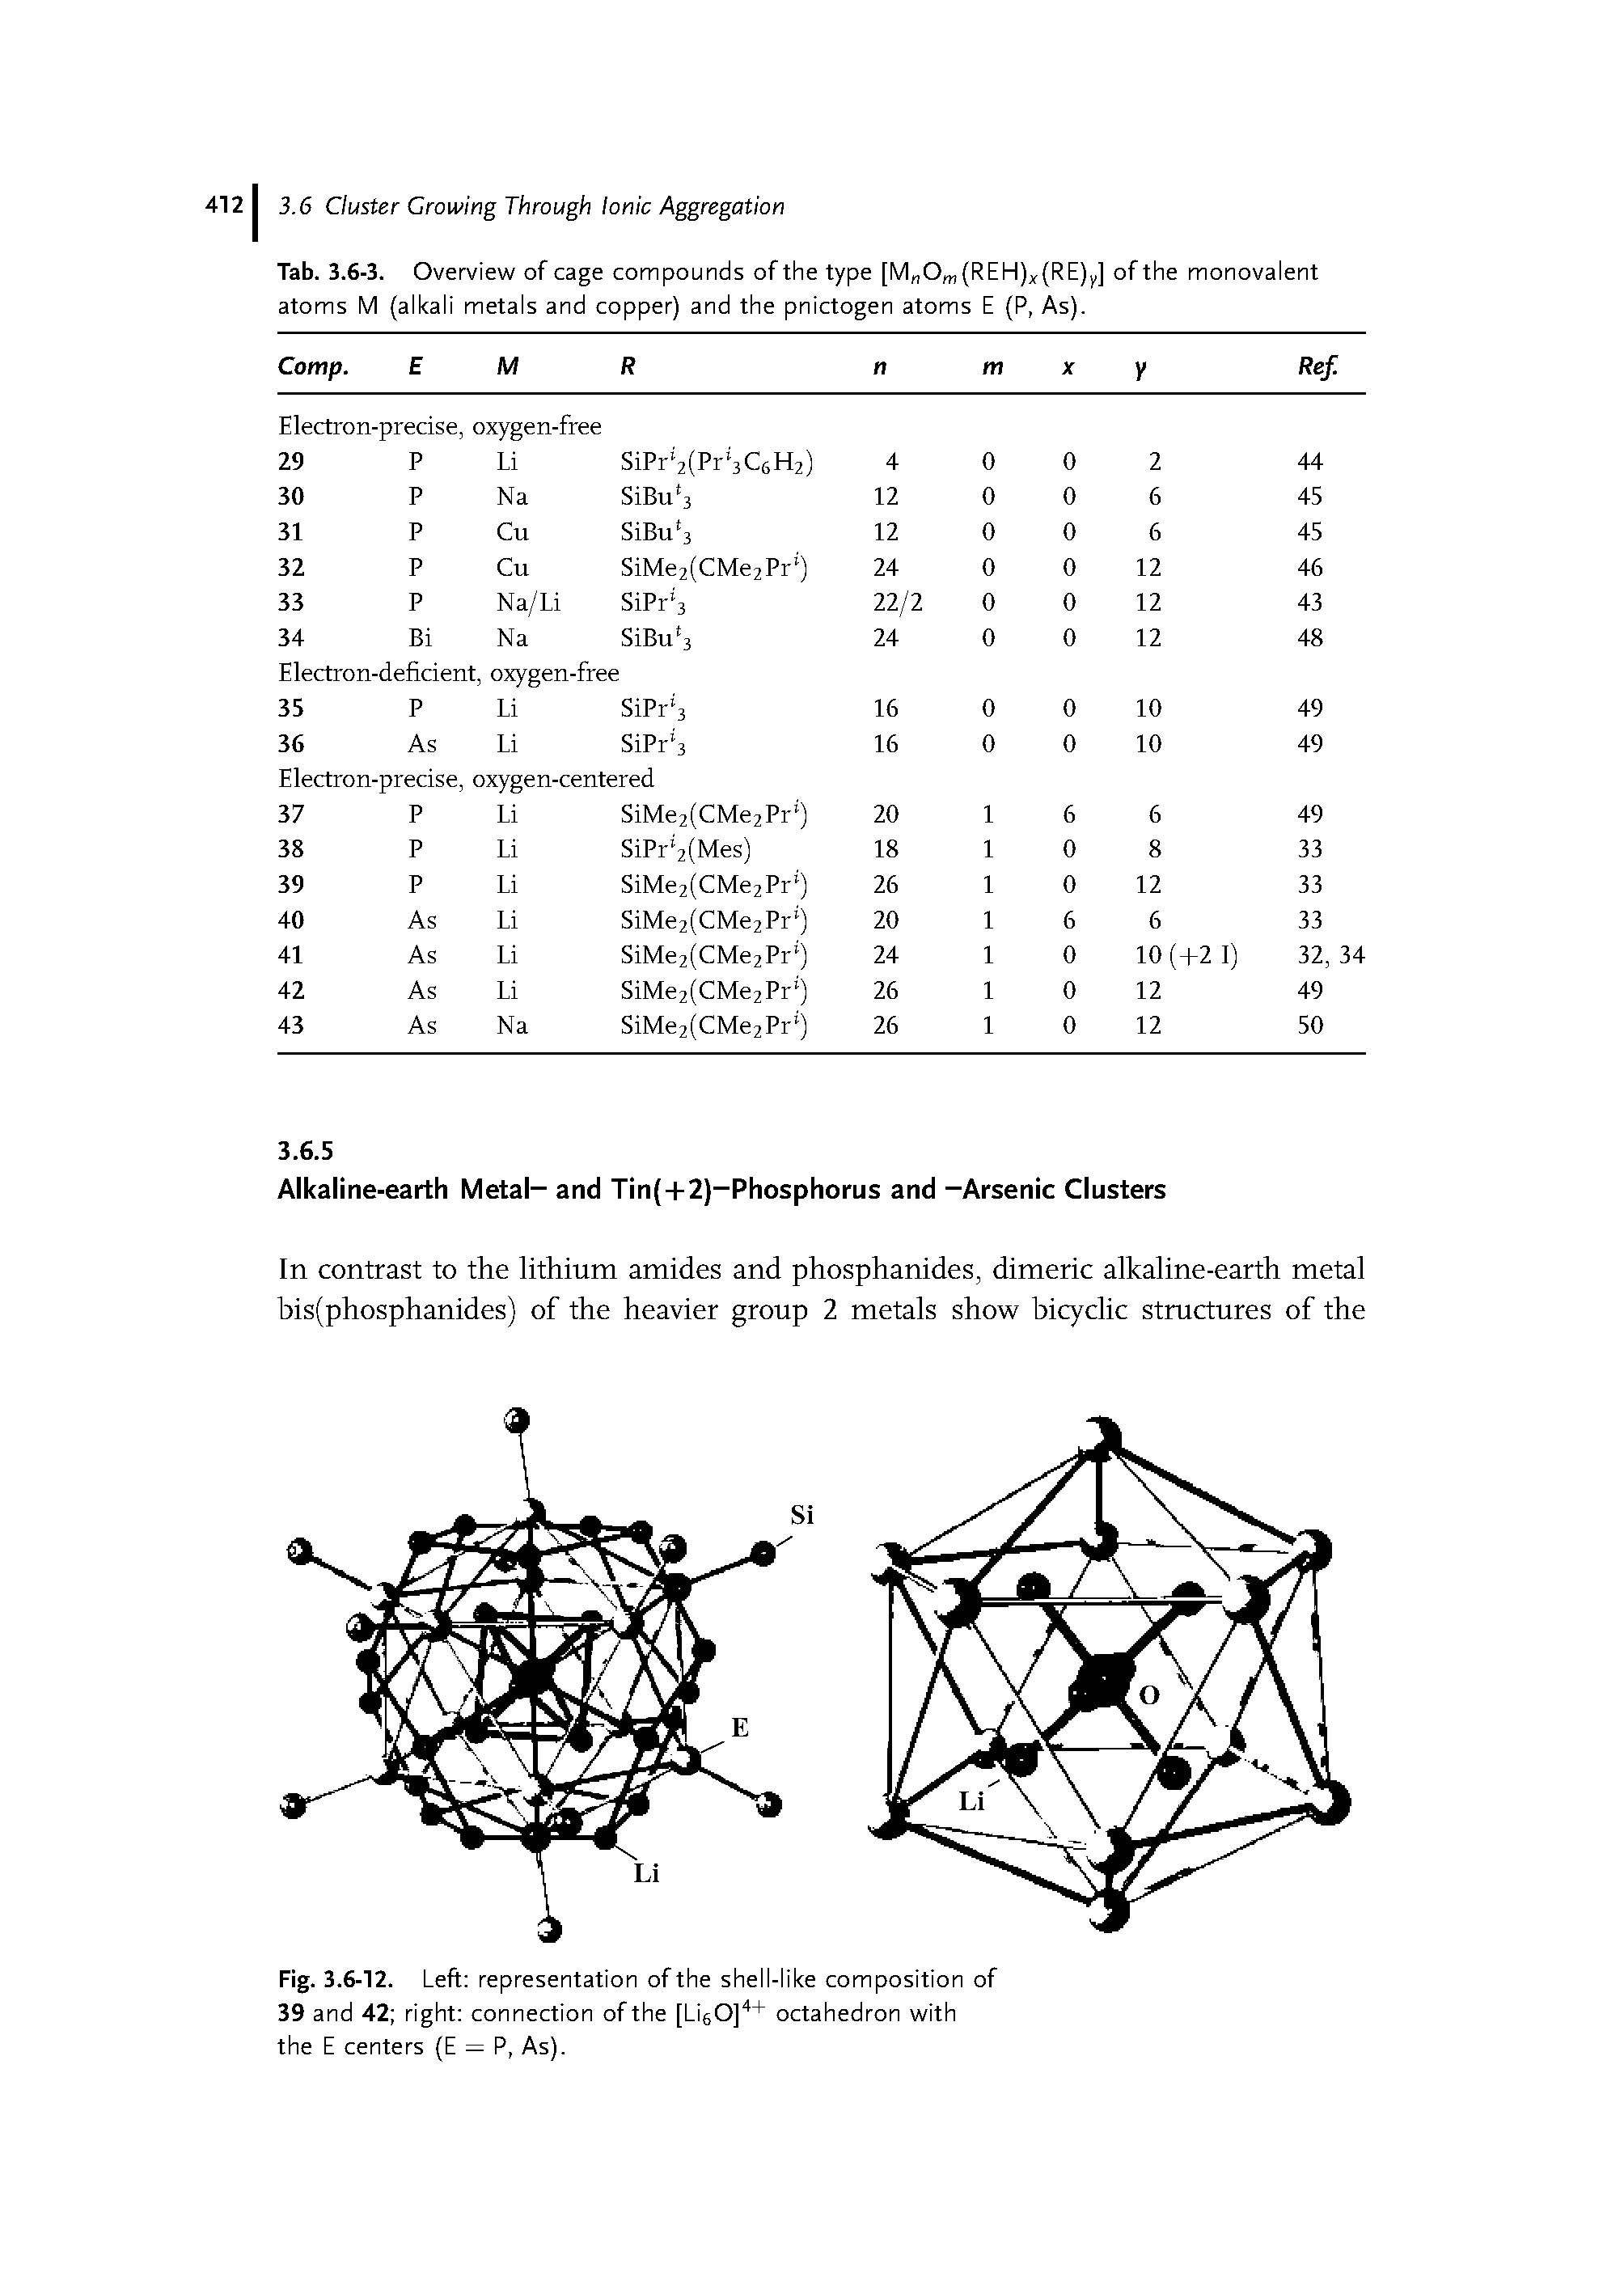 Tab. 3.6-3. Overview of cage compounds of the type [M Om(REH)x(RE)y] of the monovalent atoms M (alkali metals and copper) and the pnictogen atoms E (P, As).